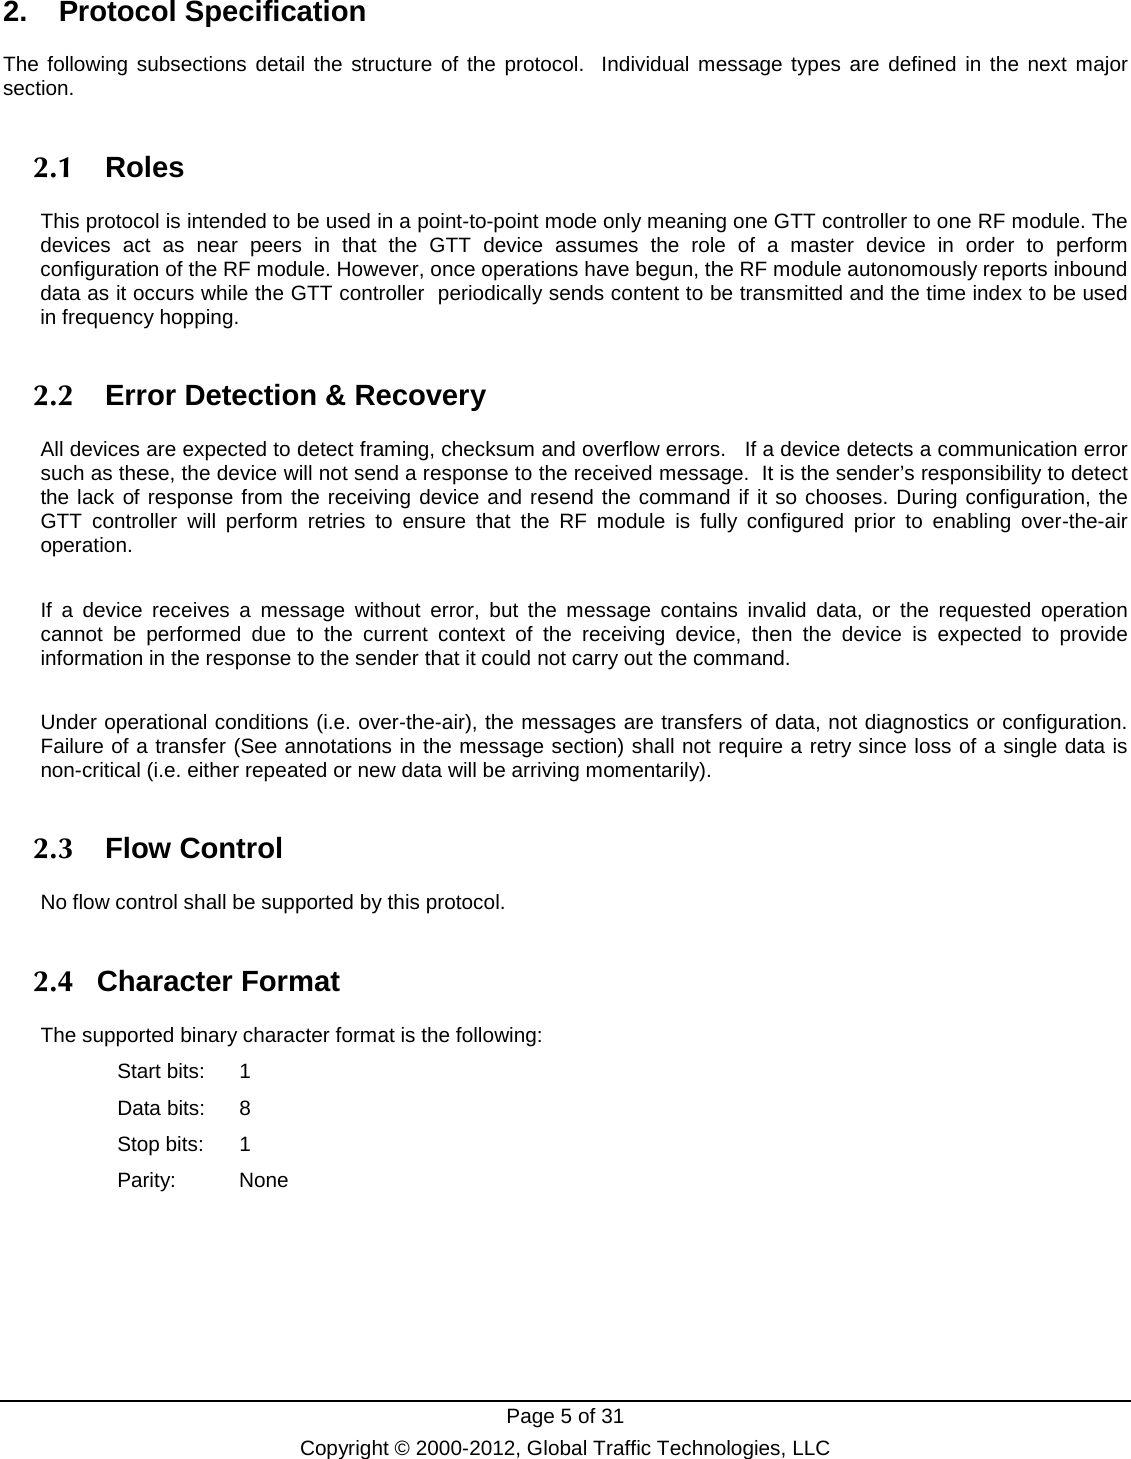  Page 5 of 31 Copyright © 2000-2012, Global Traffic Technologies, LLC 2.   Protocol Specification The following subsections detail the structure of the protocol.  Individual message types are defined in the next major section. 2.1   Roles This protocol is intended to be used in a point-to-point mode only meaning one GTT controller to one RF module. The devices act as near peers in that the GTT device assumes the role of a master device in order to perform configuration of the RF module. However, once operations have begun, the RF module autonomously reports inbound data as it occurs while the GTT controller  periodically sends content to be transmitted and the time index to be used in frequency hopping.   2.2   Error Detection &amp; Recovery All devices are expected to detect framing, checksum and overflow errors.   If a device detects a communication error such as these, the device will not send a response to the received message.  It is the sender’s responsibility to detect the lack of response from the receiving device and resend the command if it so chooses. During configuration, the GTT controller will perform retries to ensure that the RF module is fully configured prior to enabling over-the-air operation.  If a device receives a message without  error, but the message contains invalid data, or the requested operation cannot be performed due to the current context of the receiving device,  then  the  device is expected to provide information in the response to the sender that it could not carry out the command.    Under operational conditions (i.e. over-the-air), the messages are transfers of data, not diagnostics or configuration. Failure of a transfer (See annotations in the message section) shall not require a retry since loss of a single data is non-critical (i.e. either repeated or new data will be arriving momentarily). 2.3   Flow Control No flow control shall be supported by this protocol.   2.4   Character Format The supported binary character format is the following: Start bits:  1 Data bits:  8 Stop bits:  1 Parity: None     